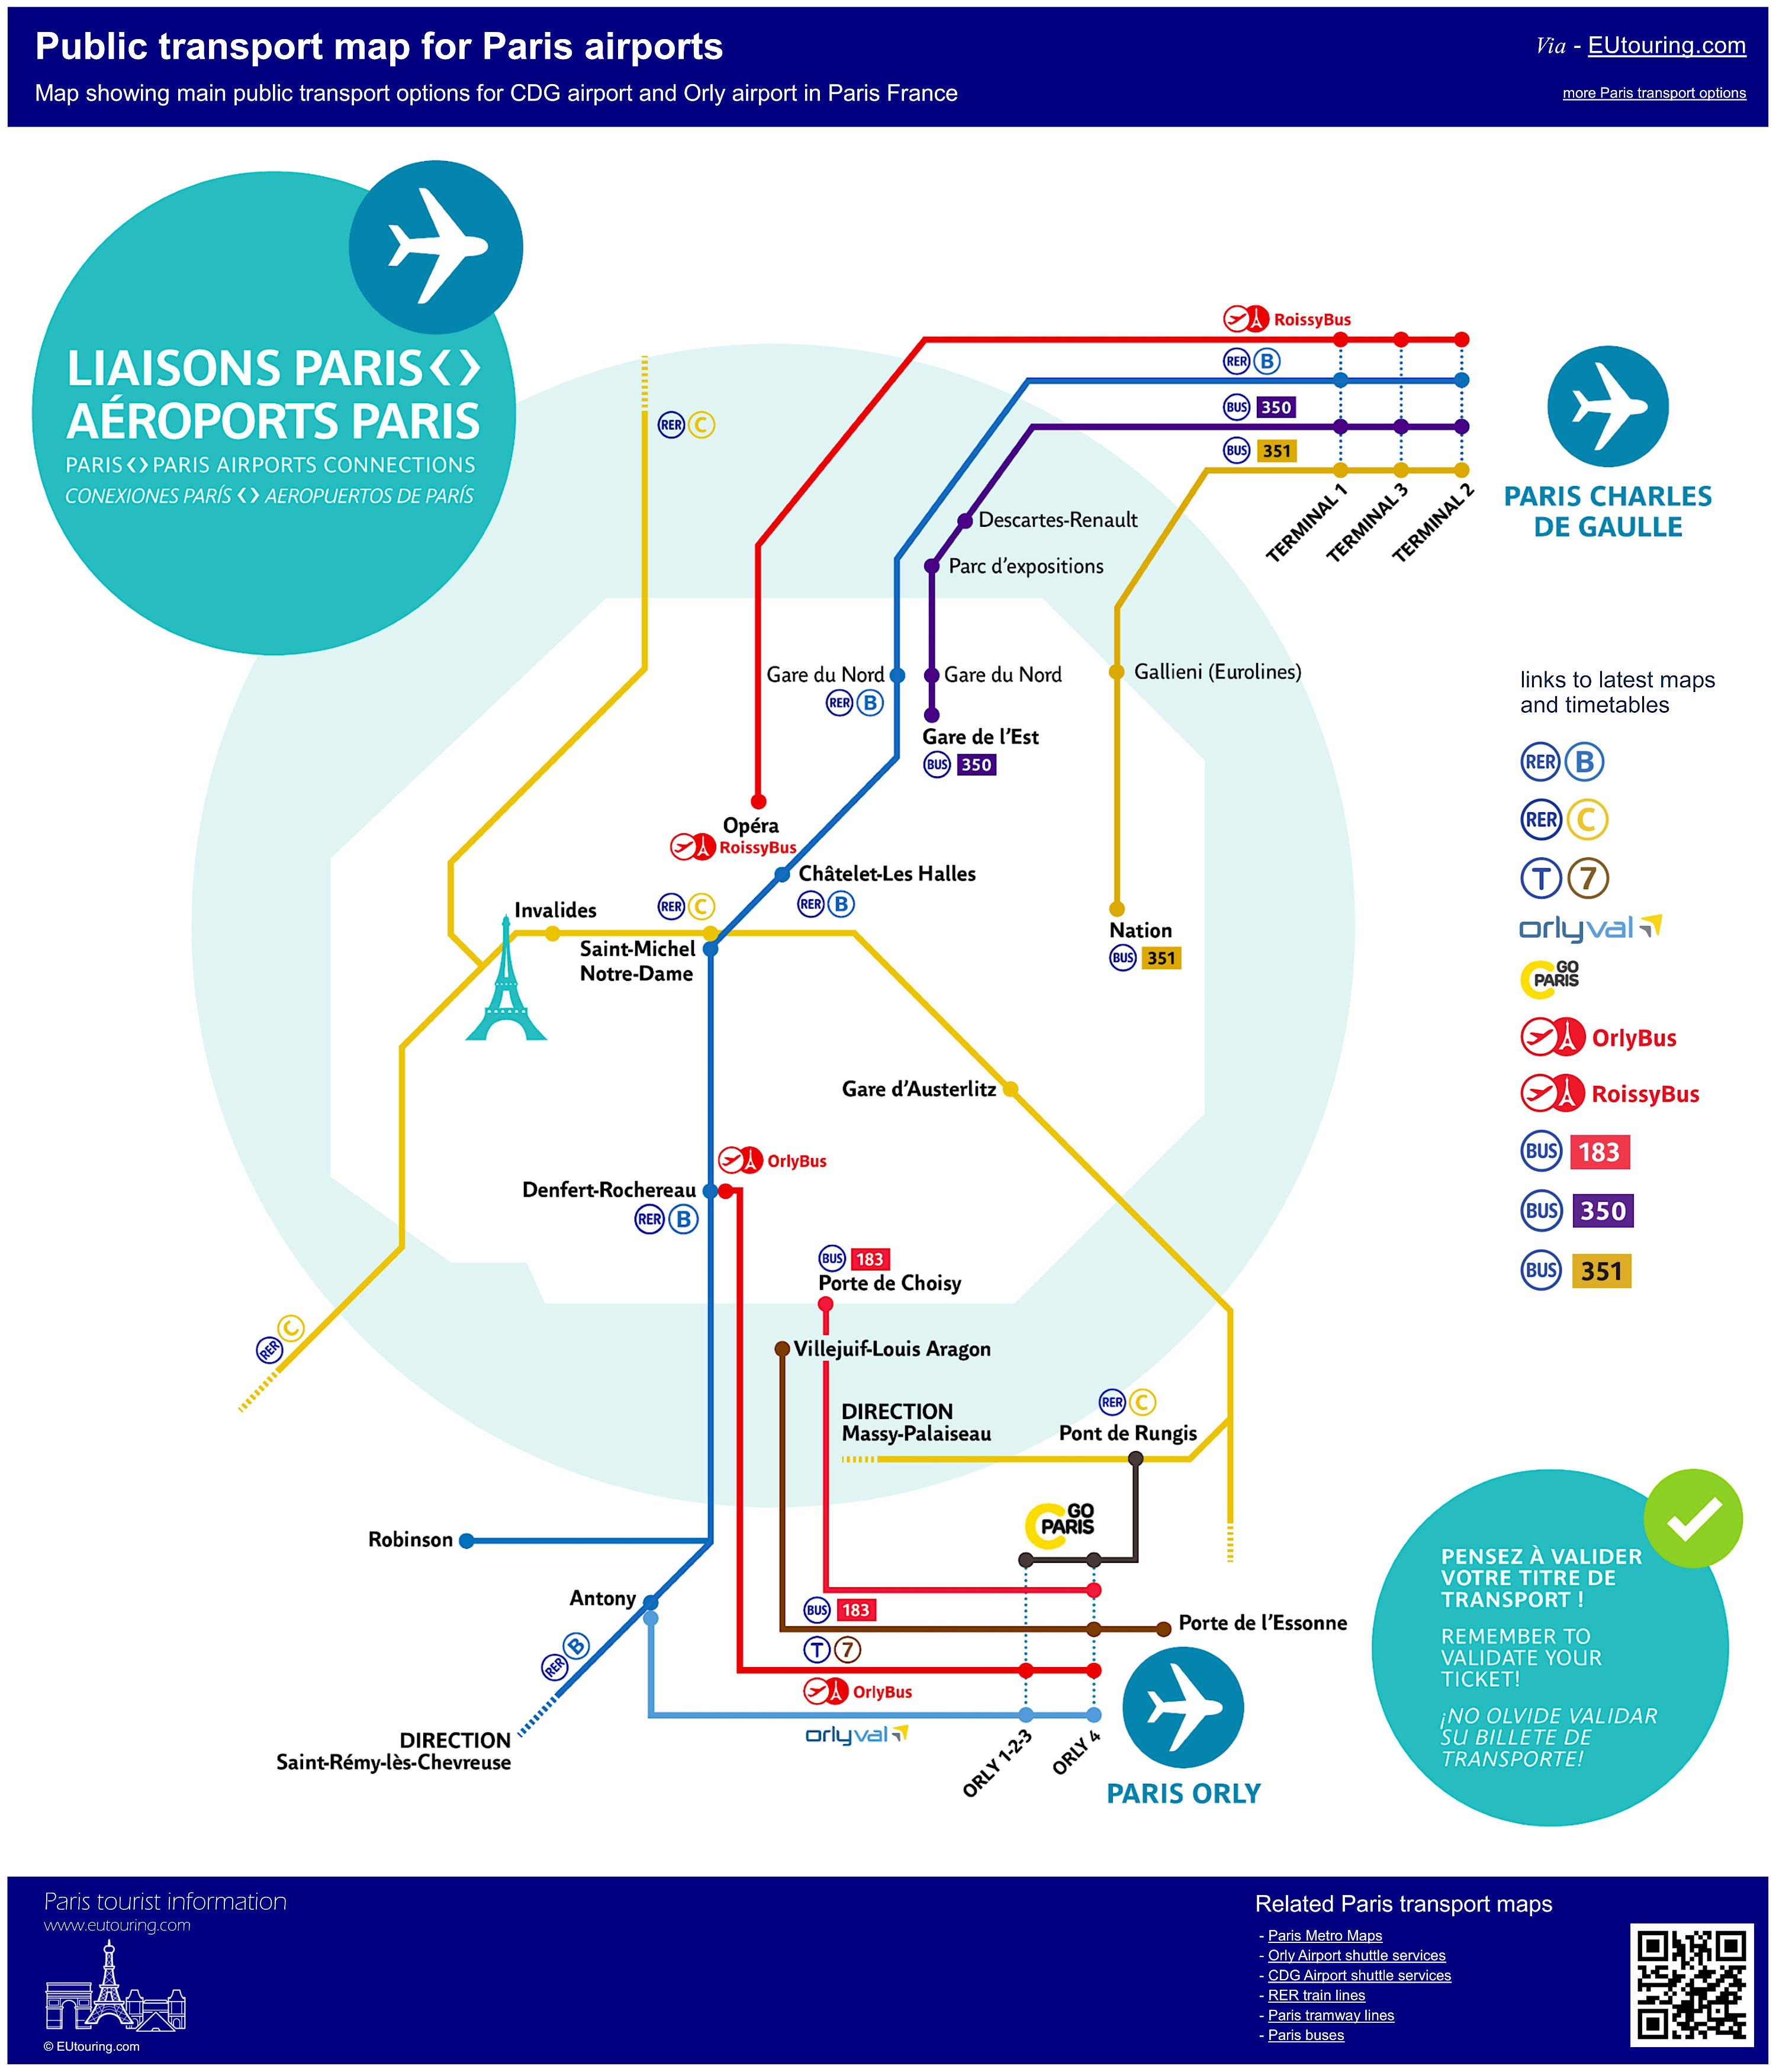 Public transport maps of trains, trams and buses for Paris airports